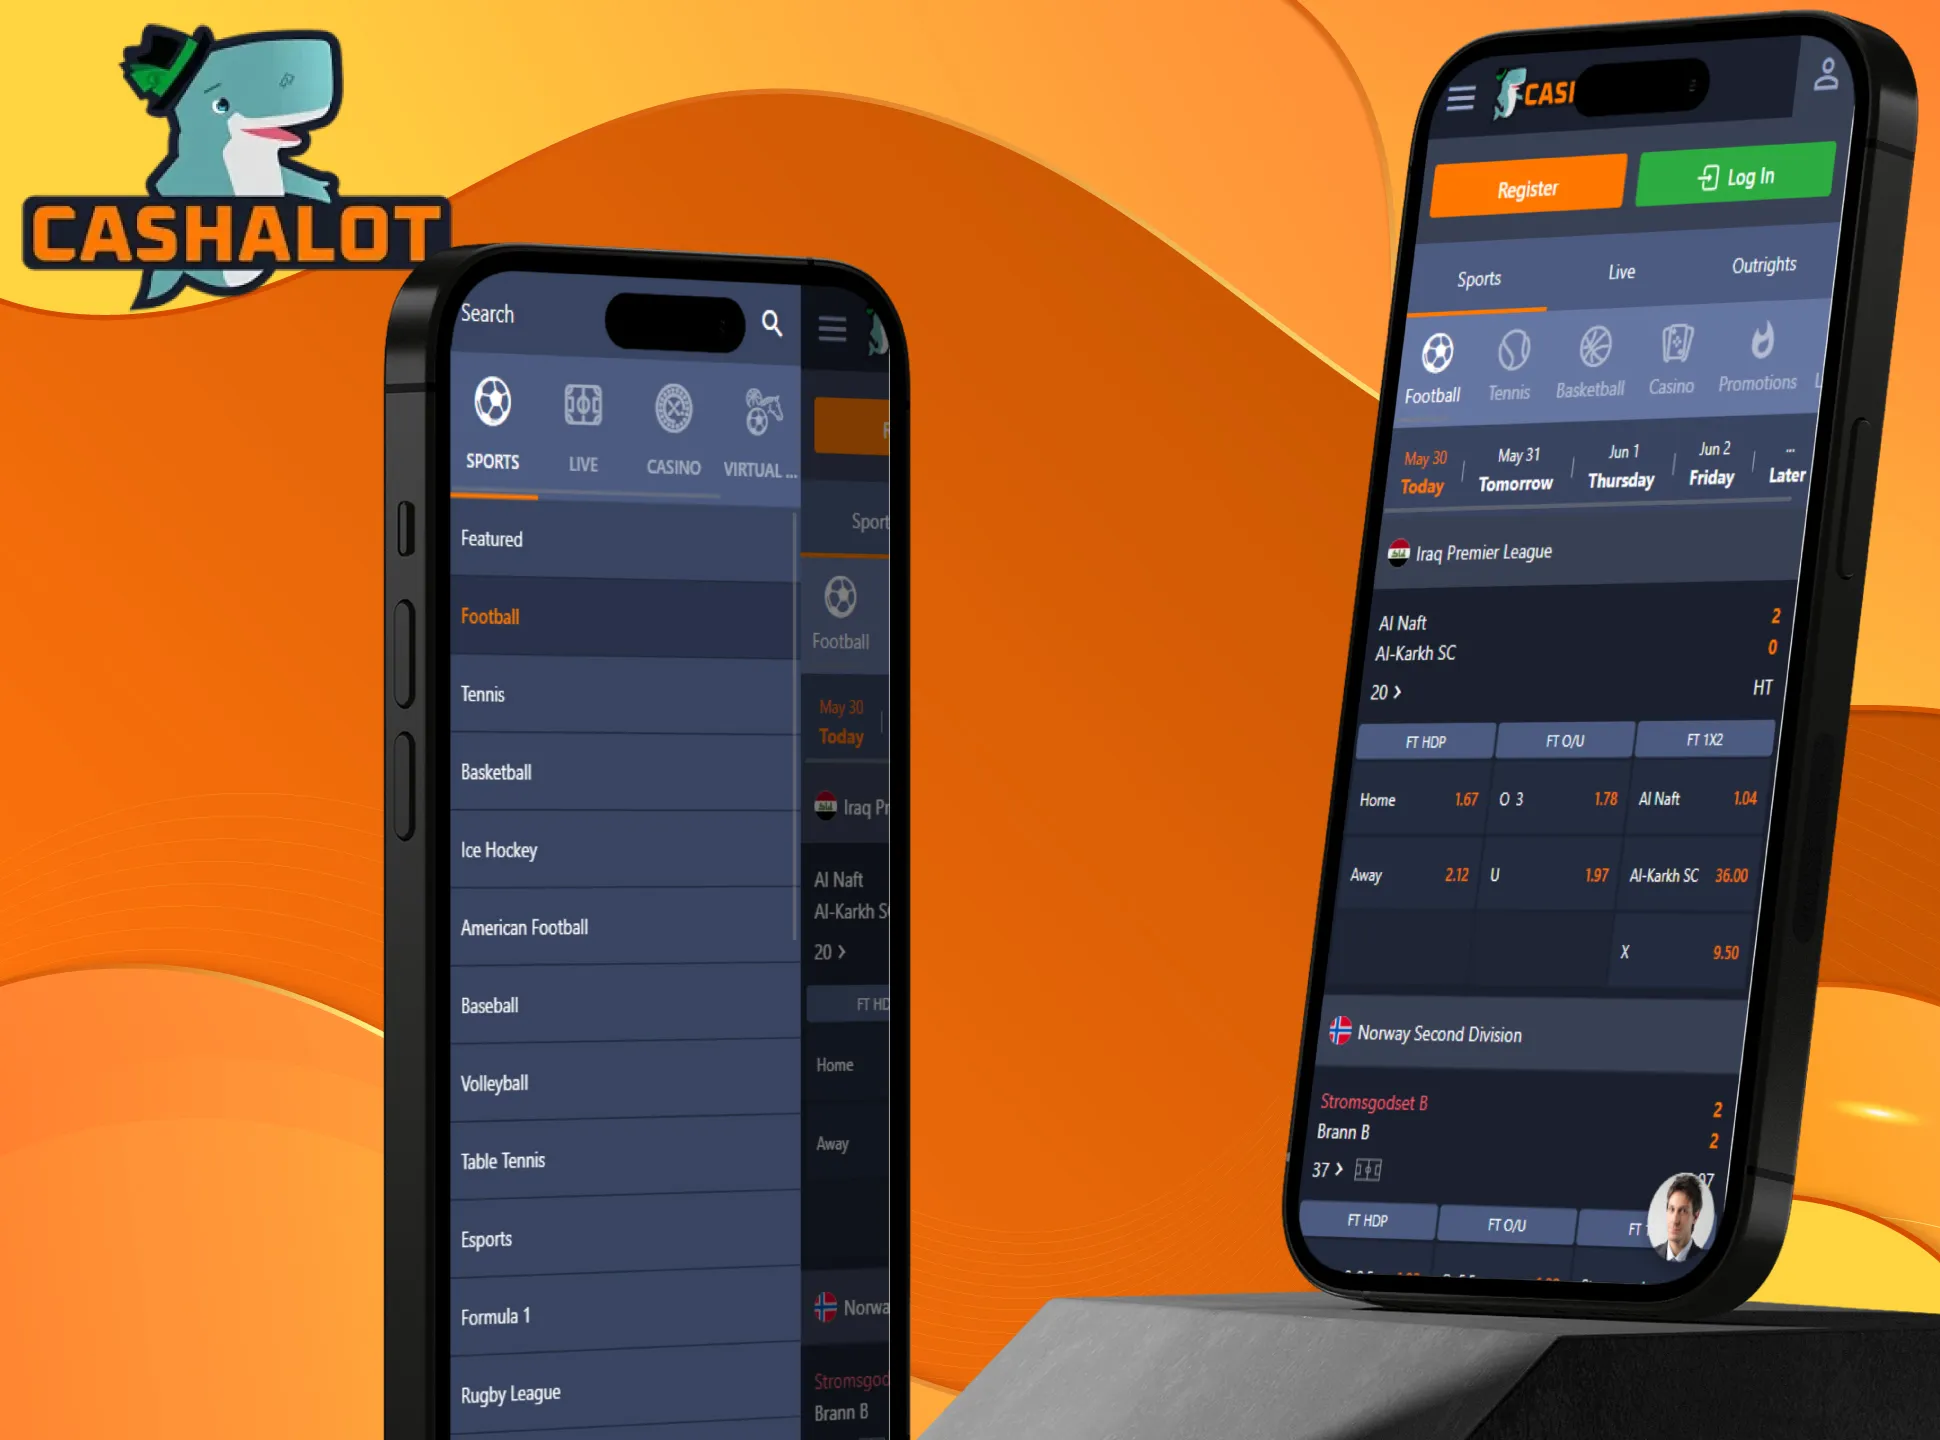 You can install the Cashalot app on multiple iOS devices at one time.